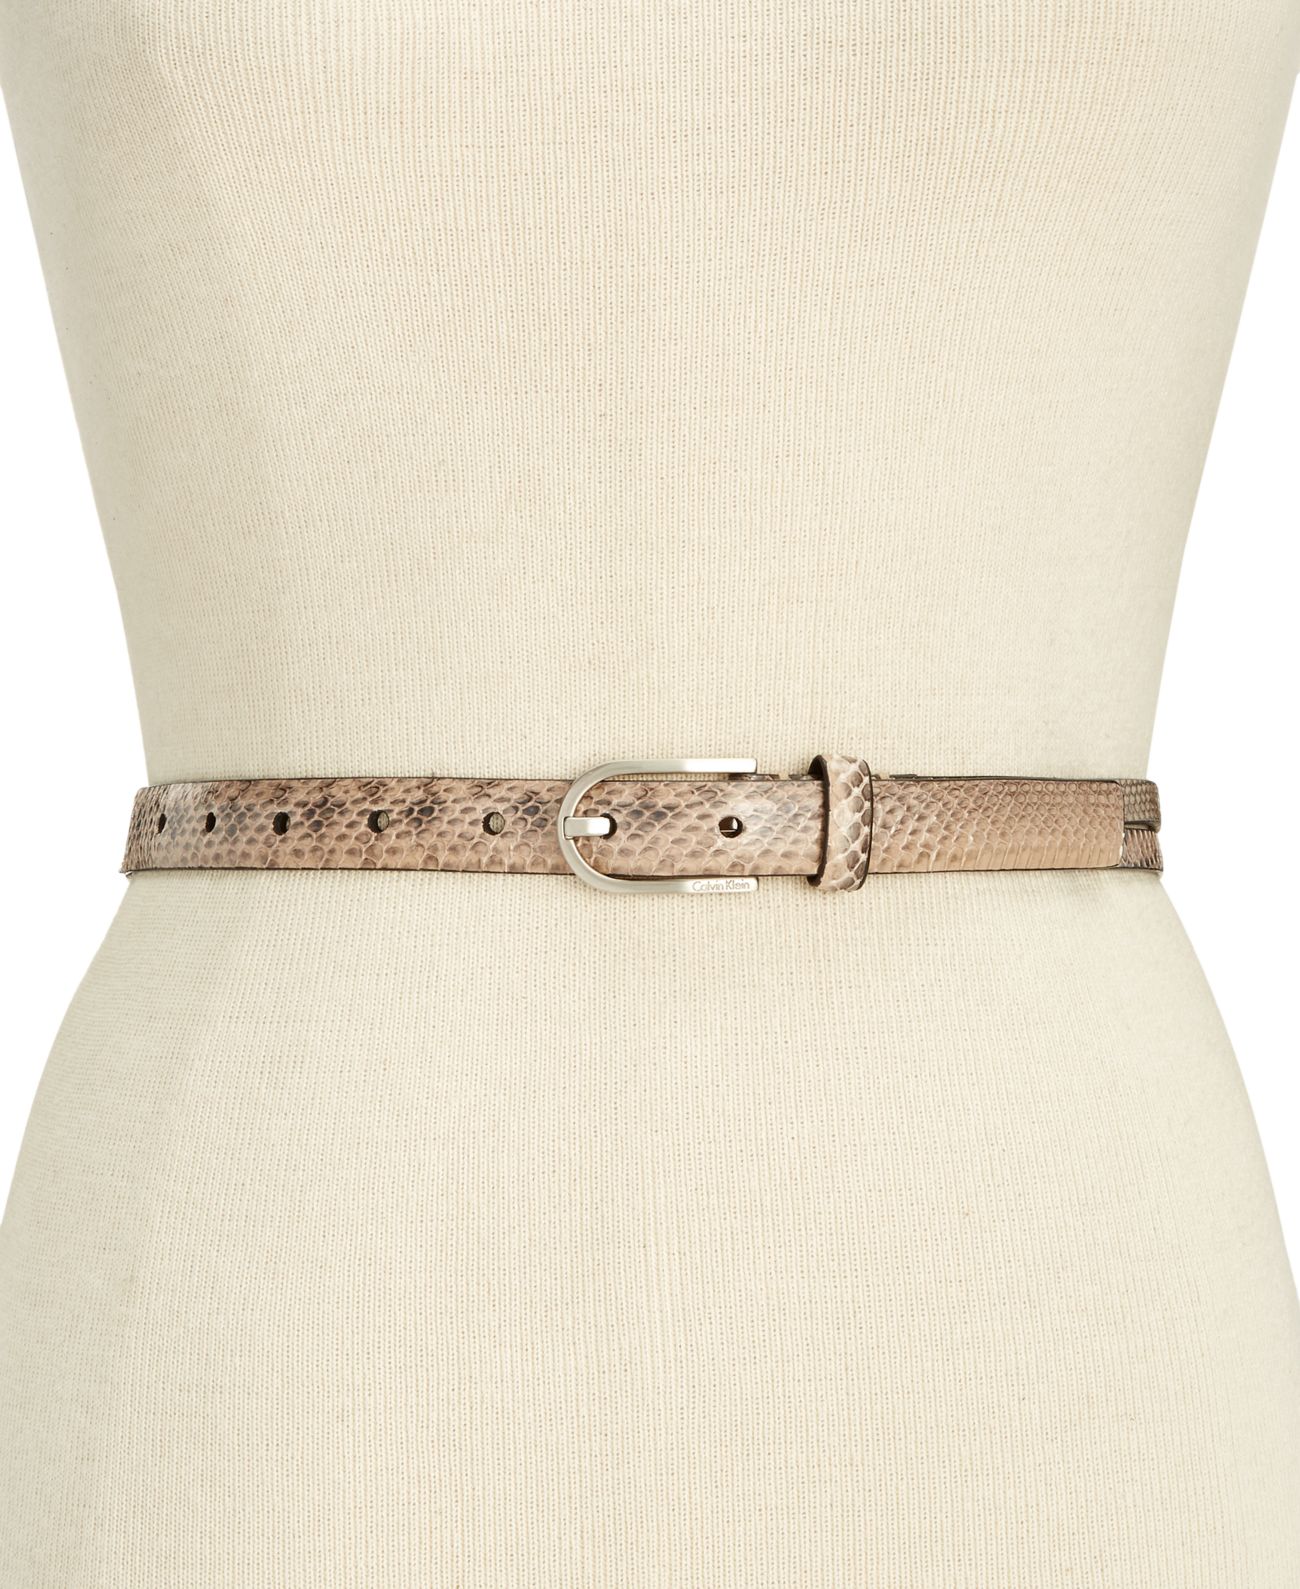 Calvin Klein Women&#8217;s Python-Embossed Leather Skinny Belts, Natural, X-Large - image 1 of 2